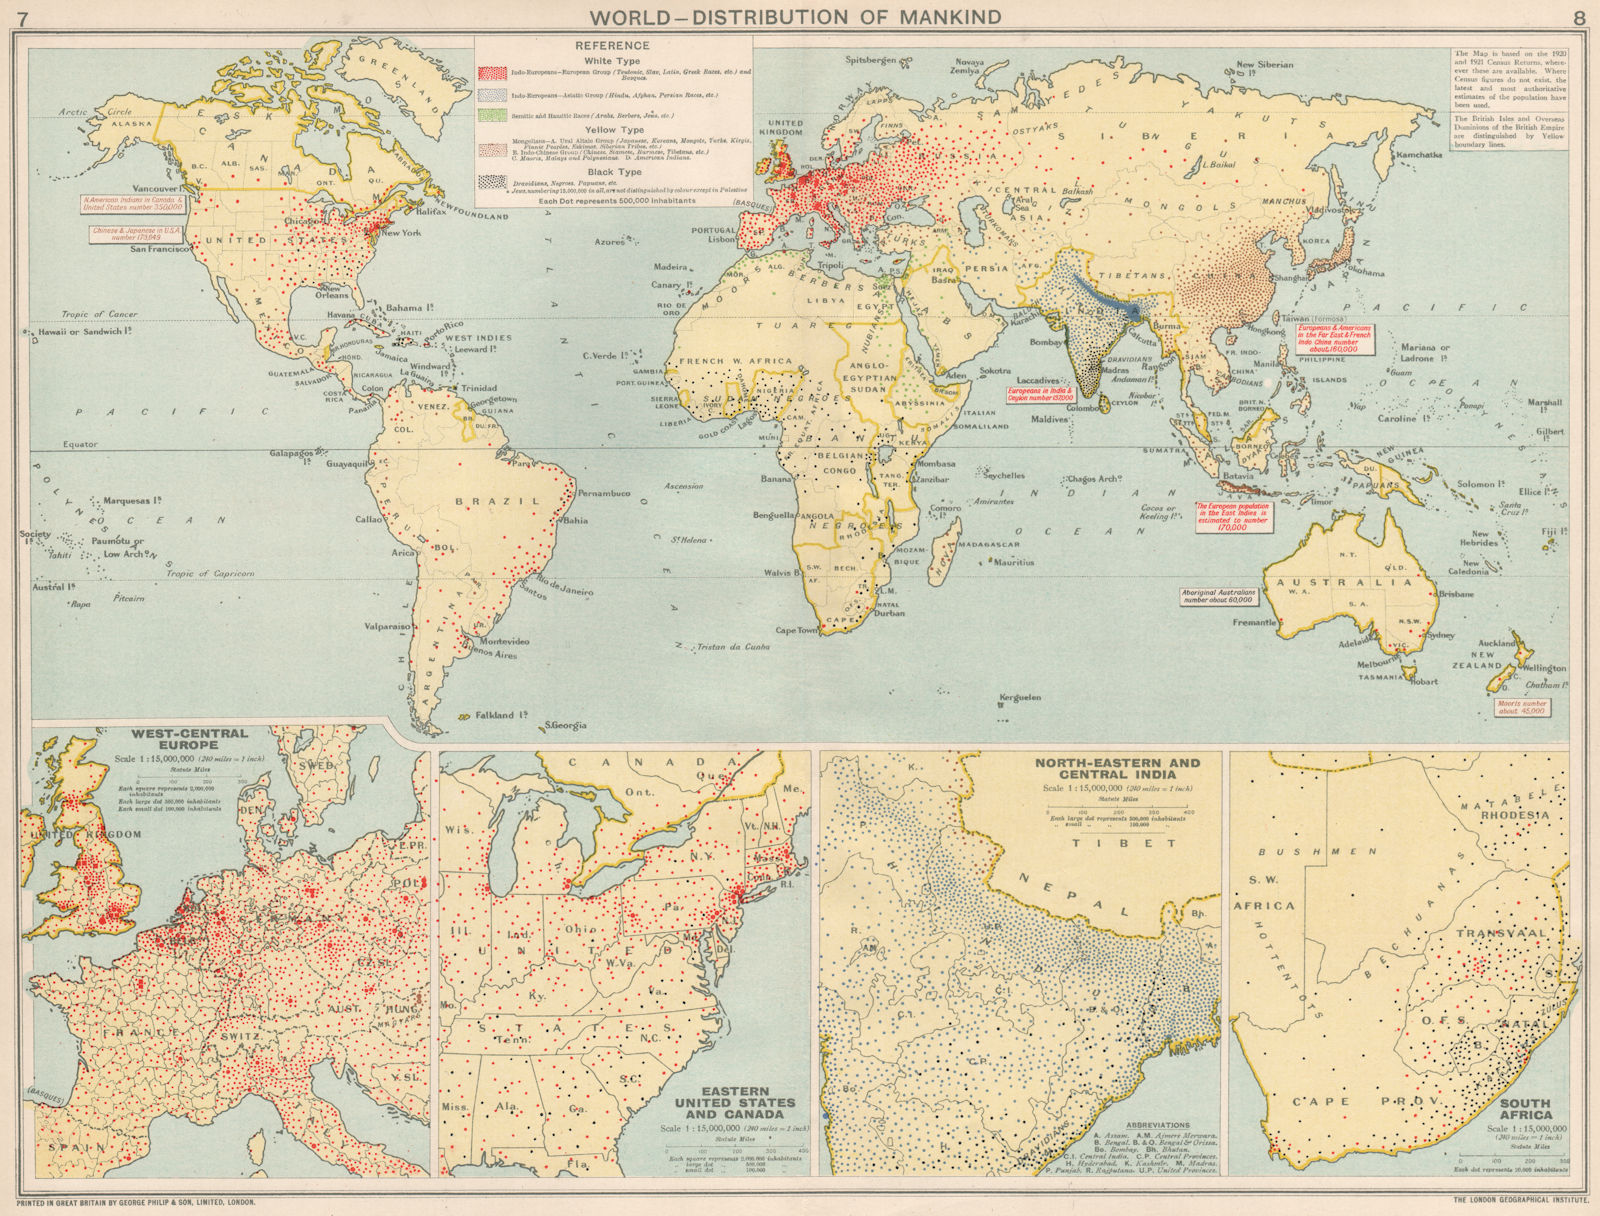 Associate Product World Distribution of Mankind. Population. Ethnicity Racial 1925 old map